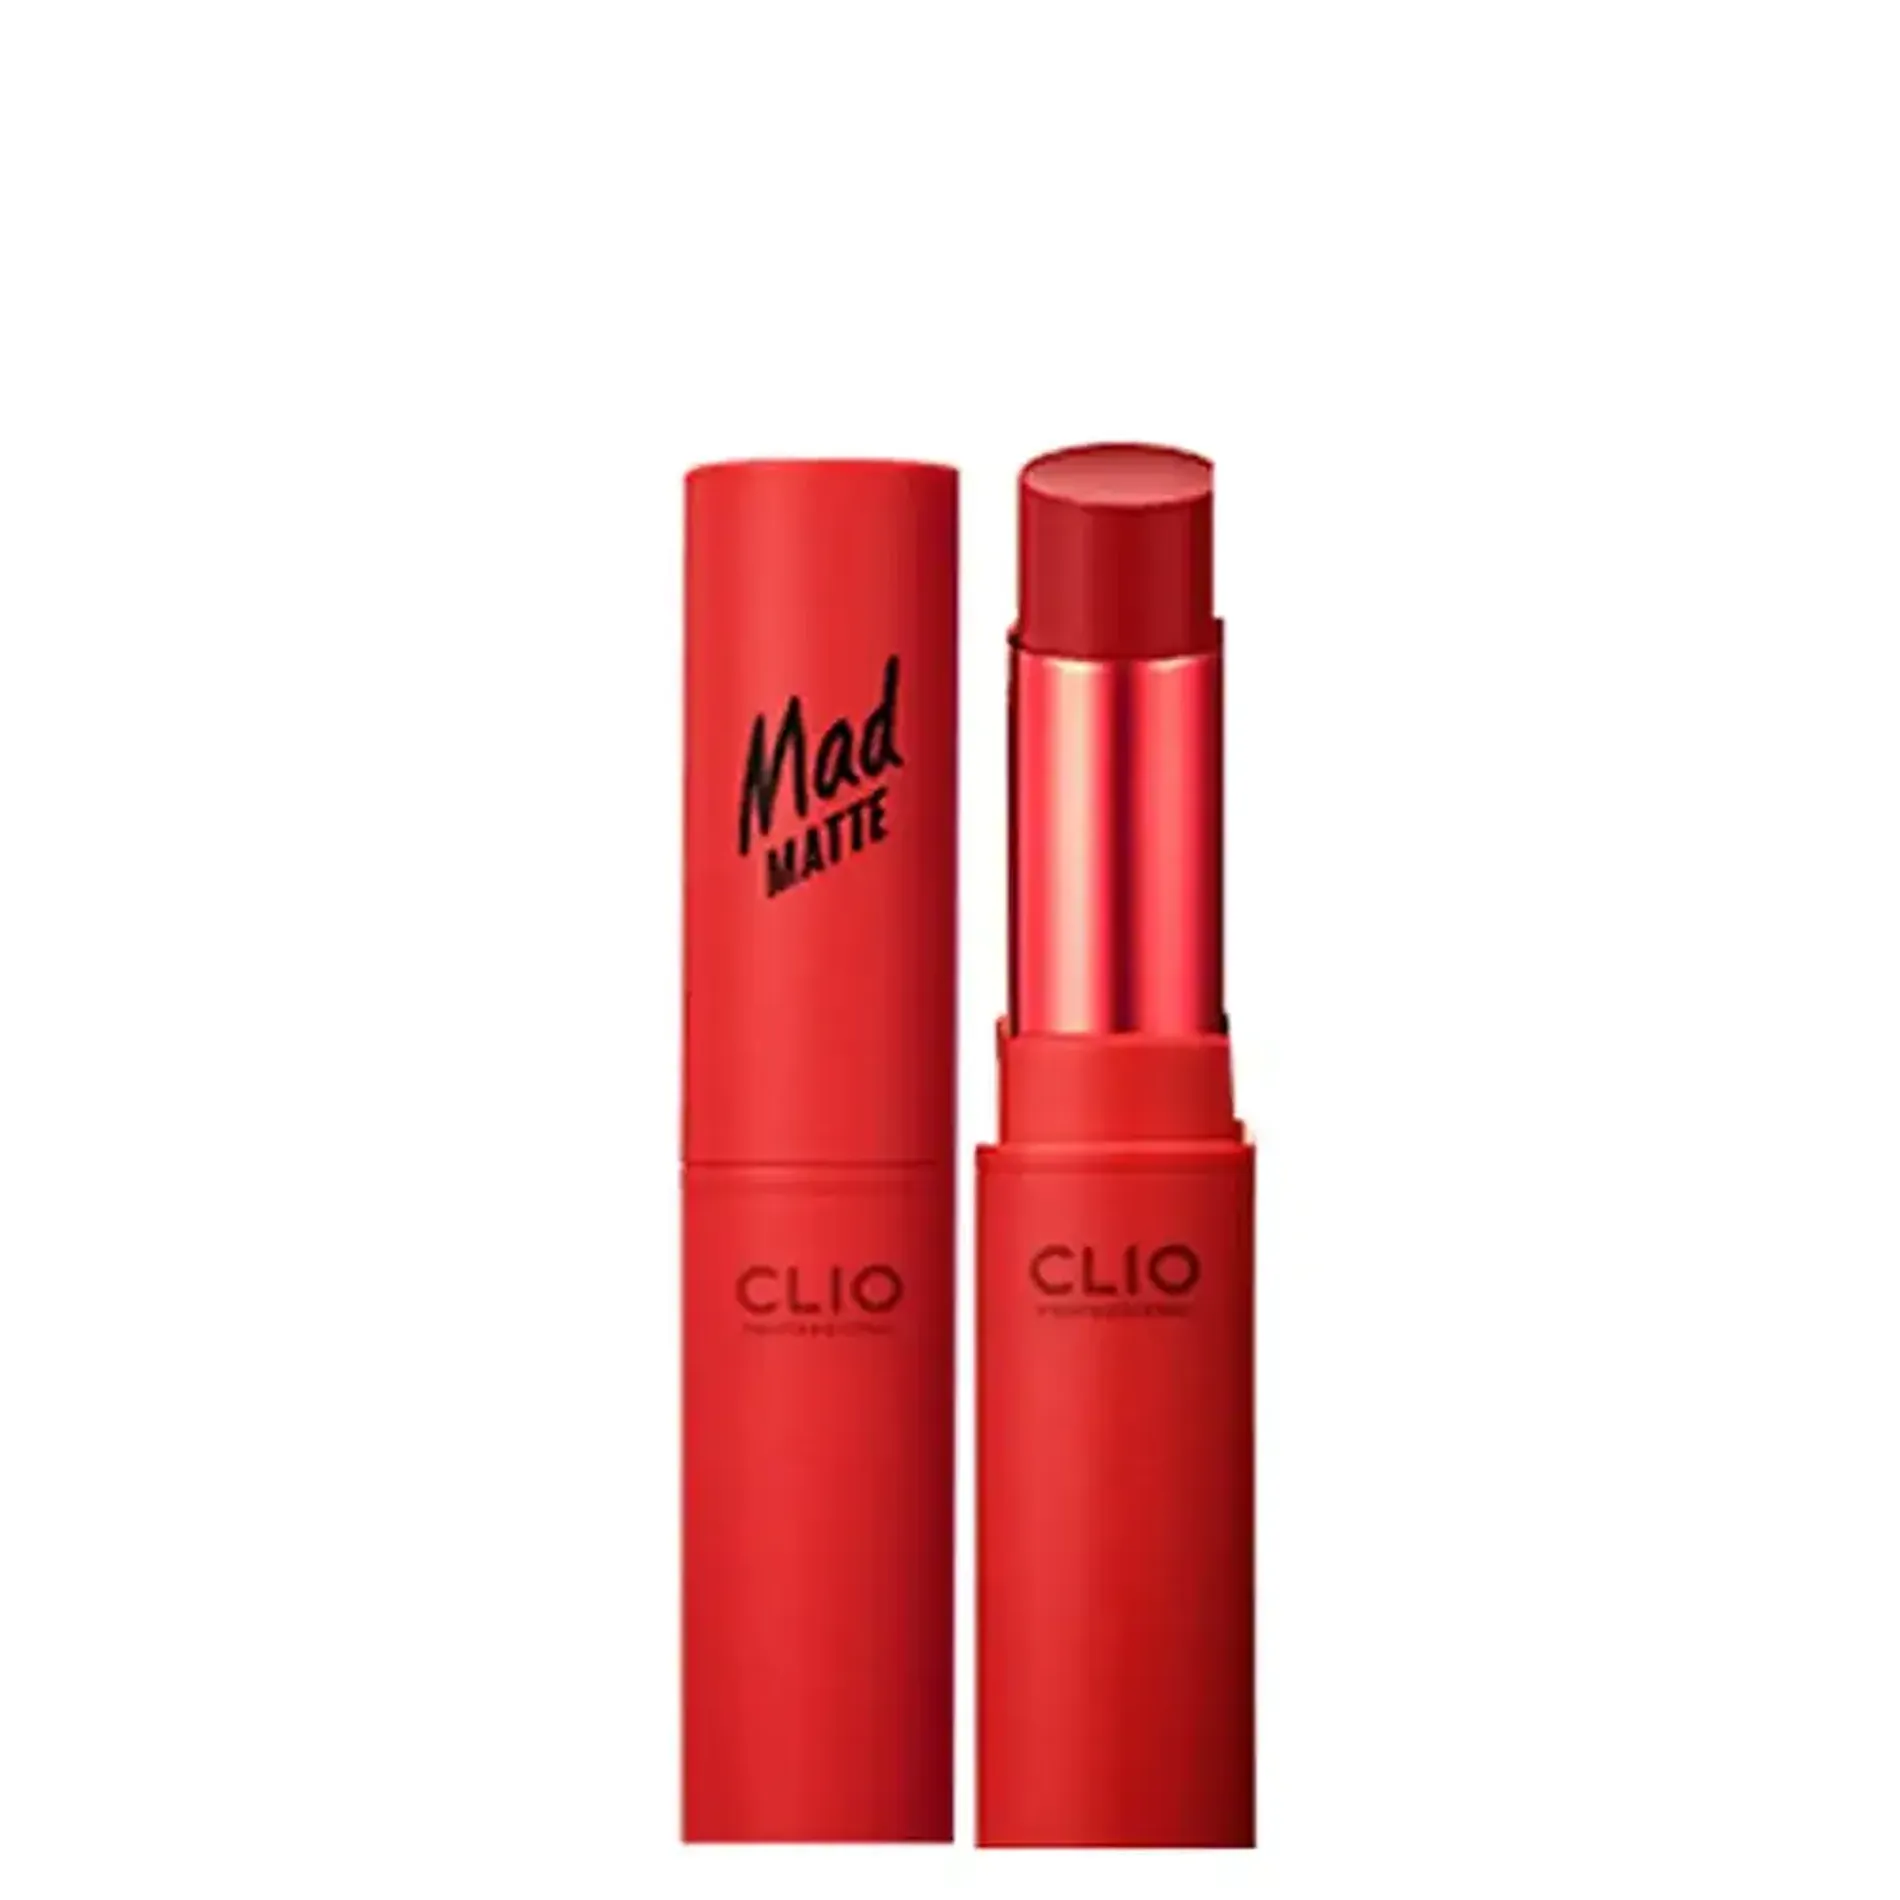 gift-son-thoi-li-clio-mad-matte-lips-18ad-005-russet-rose-1